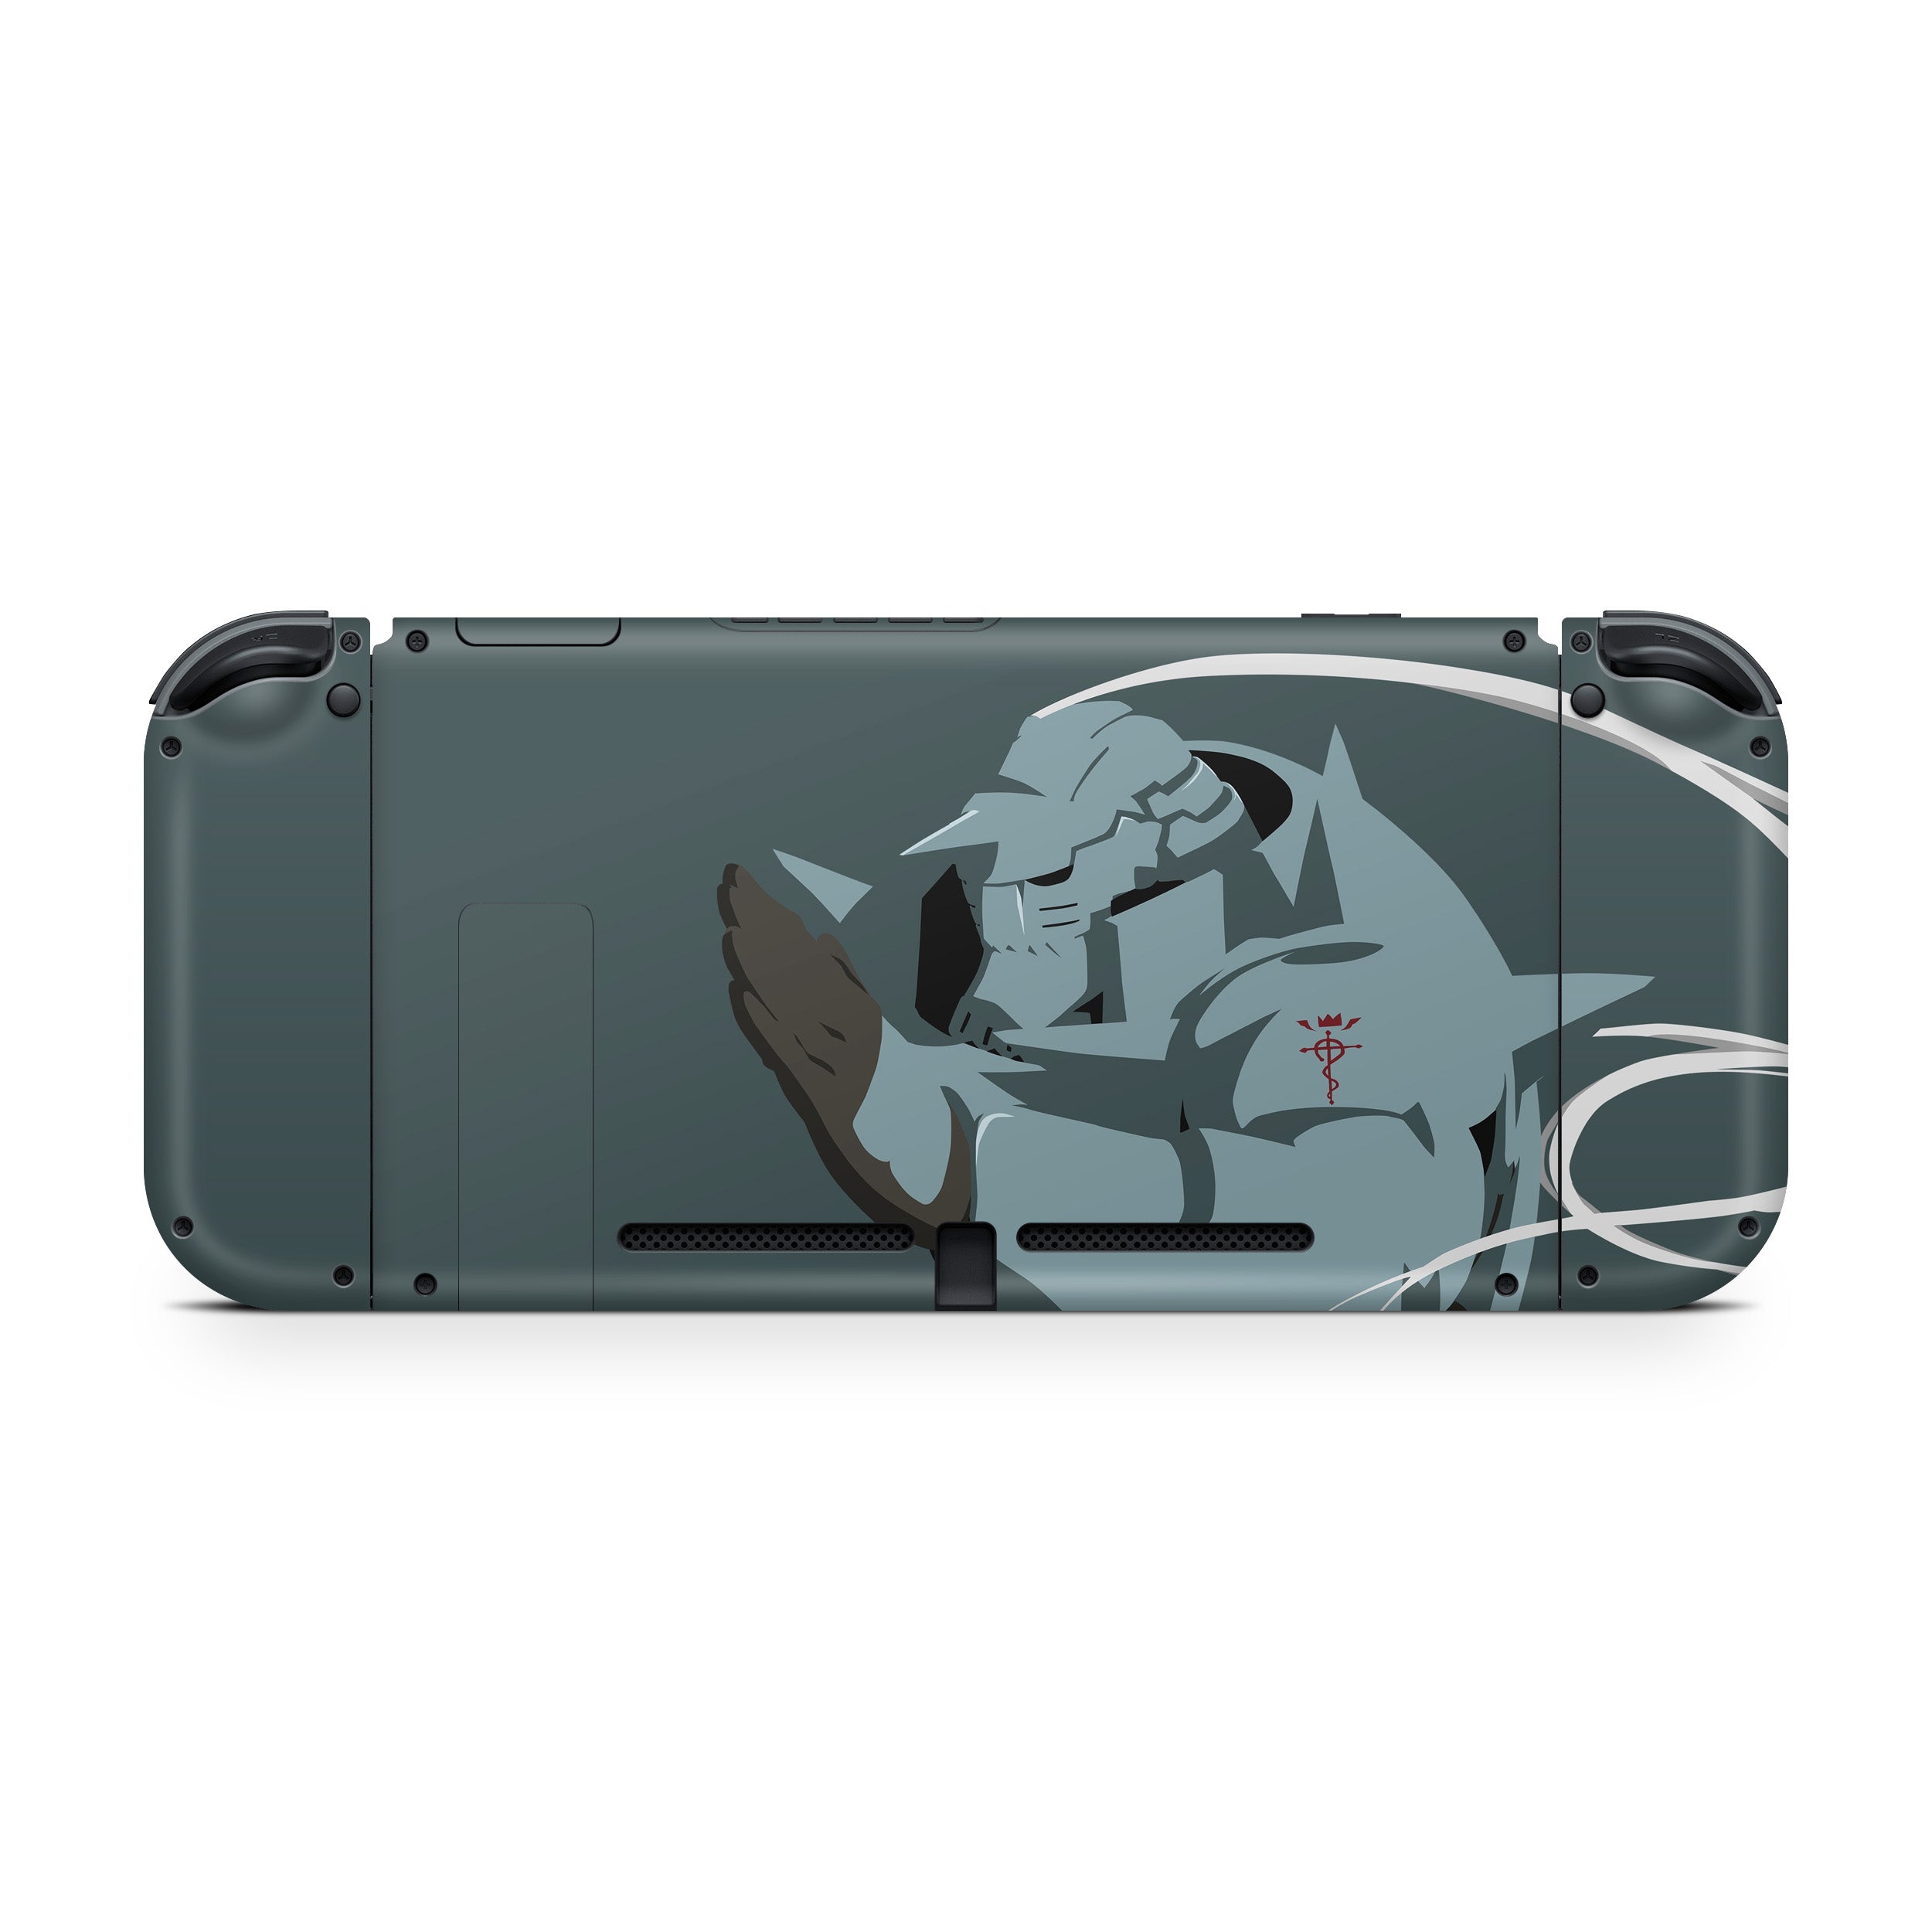 A video game skin featuring a Fullmetal Alchemist Alphonse Elric design for the Nintendo Switch.